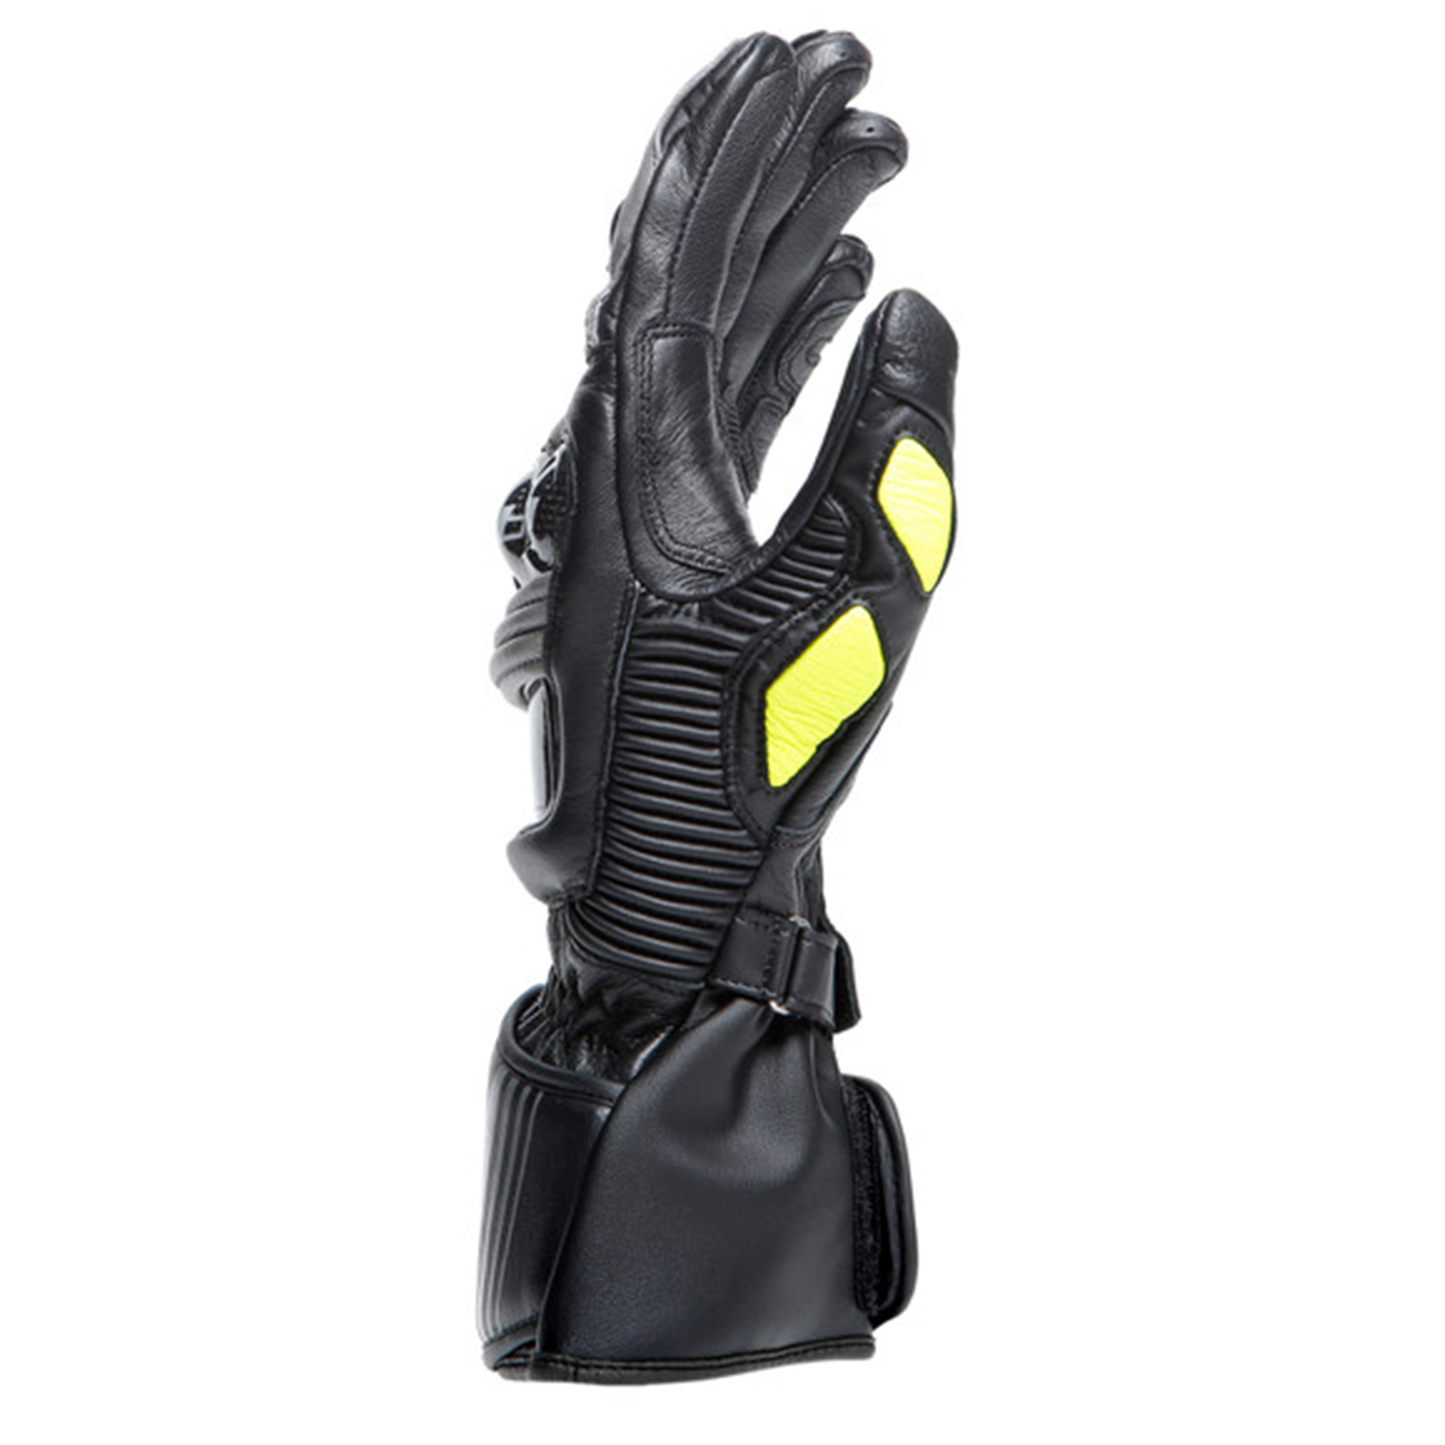 Dainese Druid 4 Leather - Black/Charcoal Grey/Flo Yellow